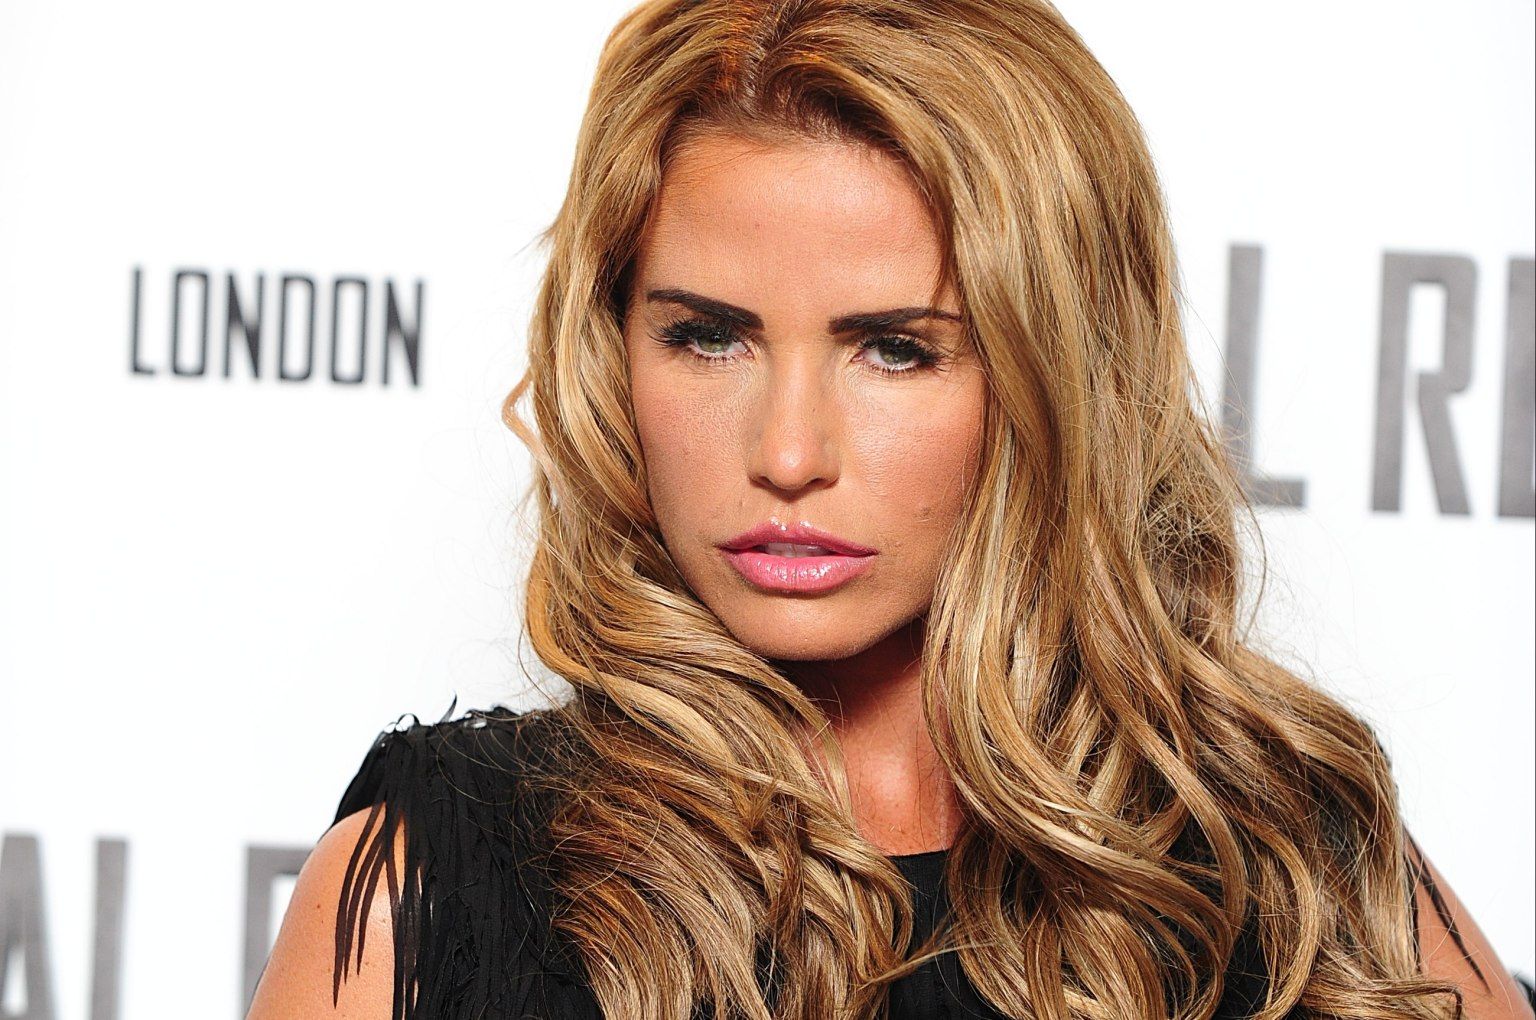 Katie Price’s New Novel ‘Playing With Fire’ Releasing On October 19